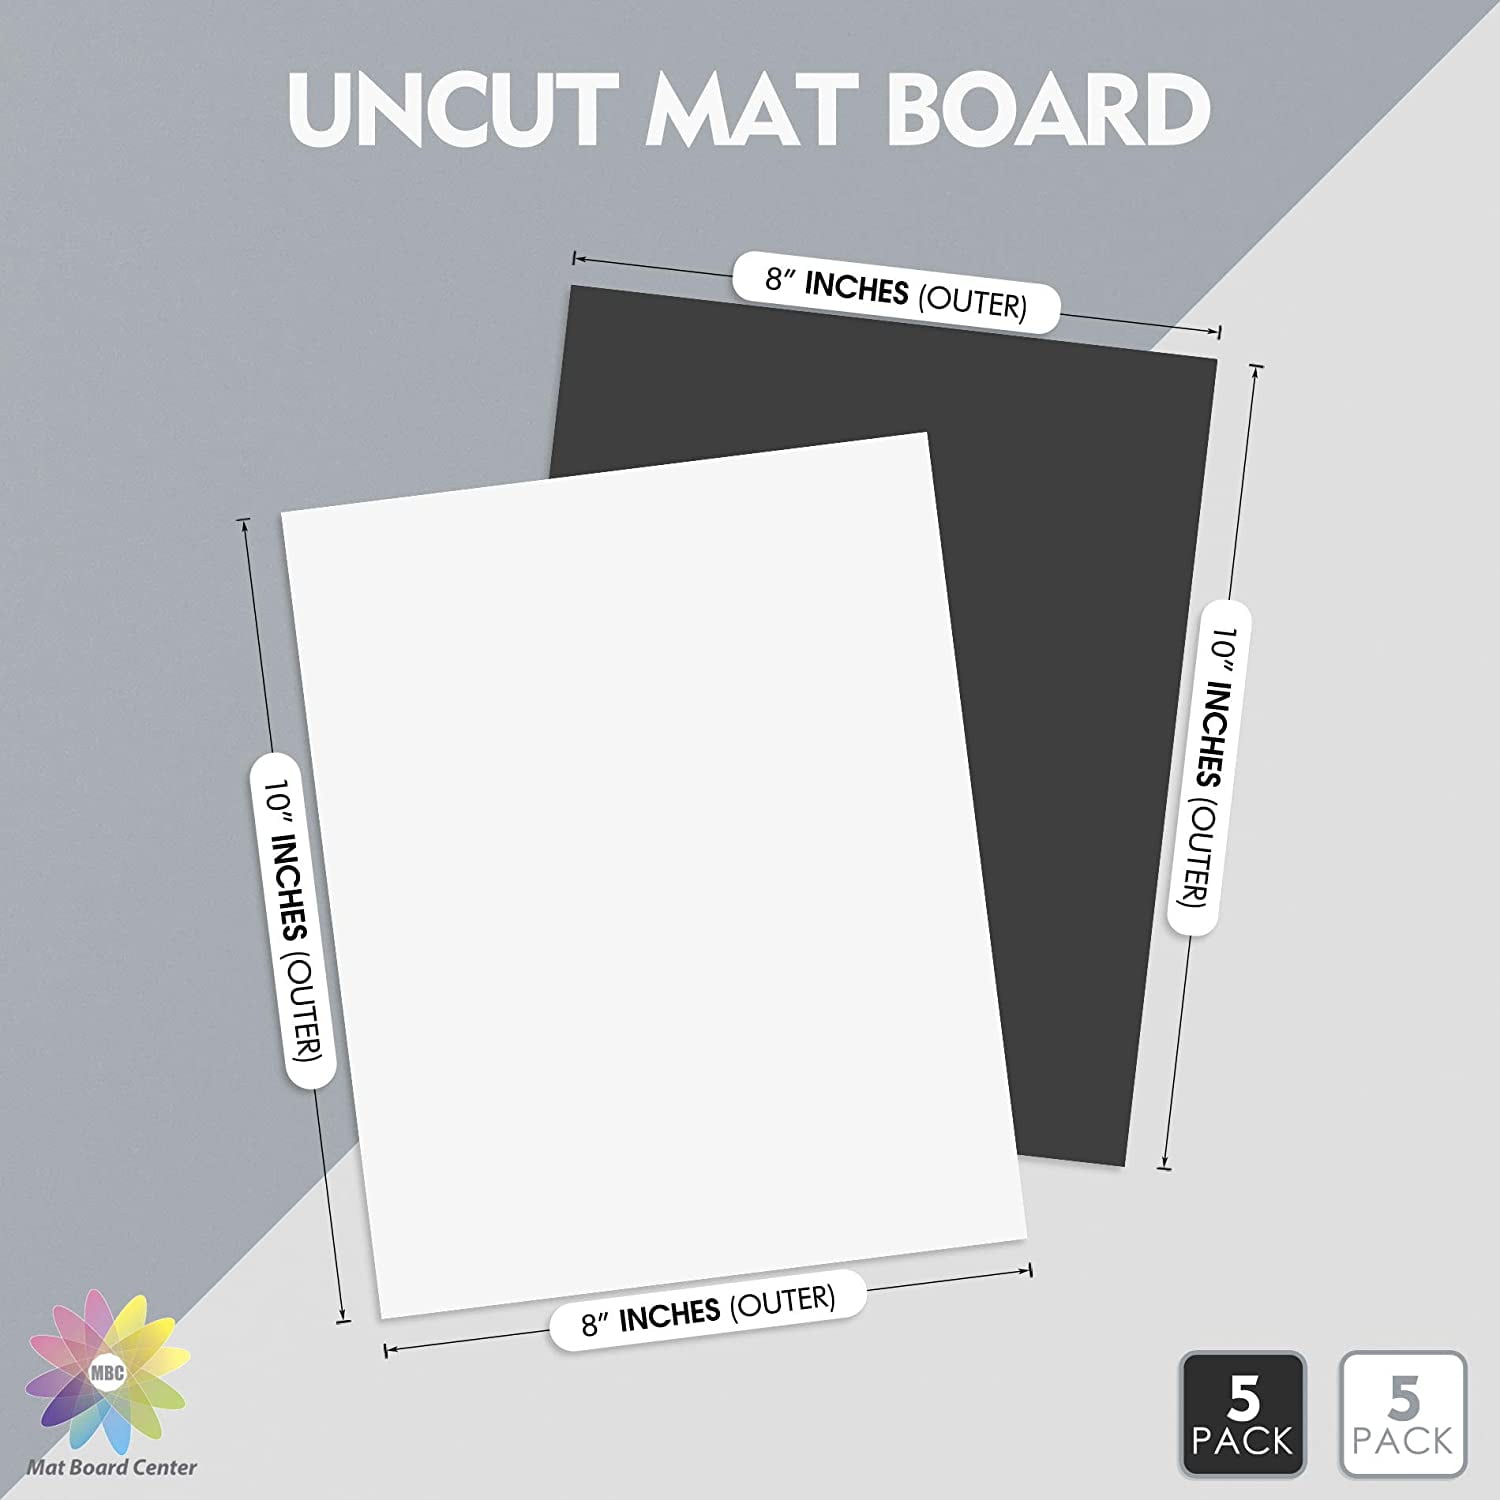  Mat Board Center, 11x14 Hunter Green Color Uncut Photo Mat  Boards - 1/16 Thickness - for Frames, Prints, Photos and More (10 Pack)